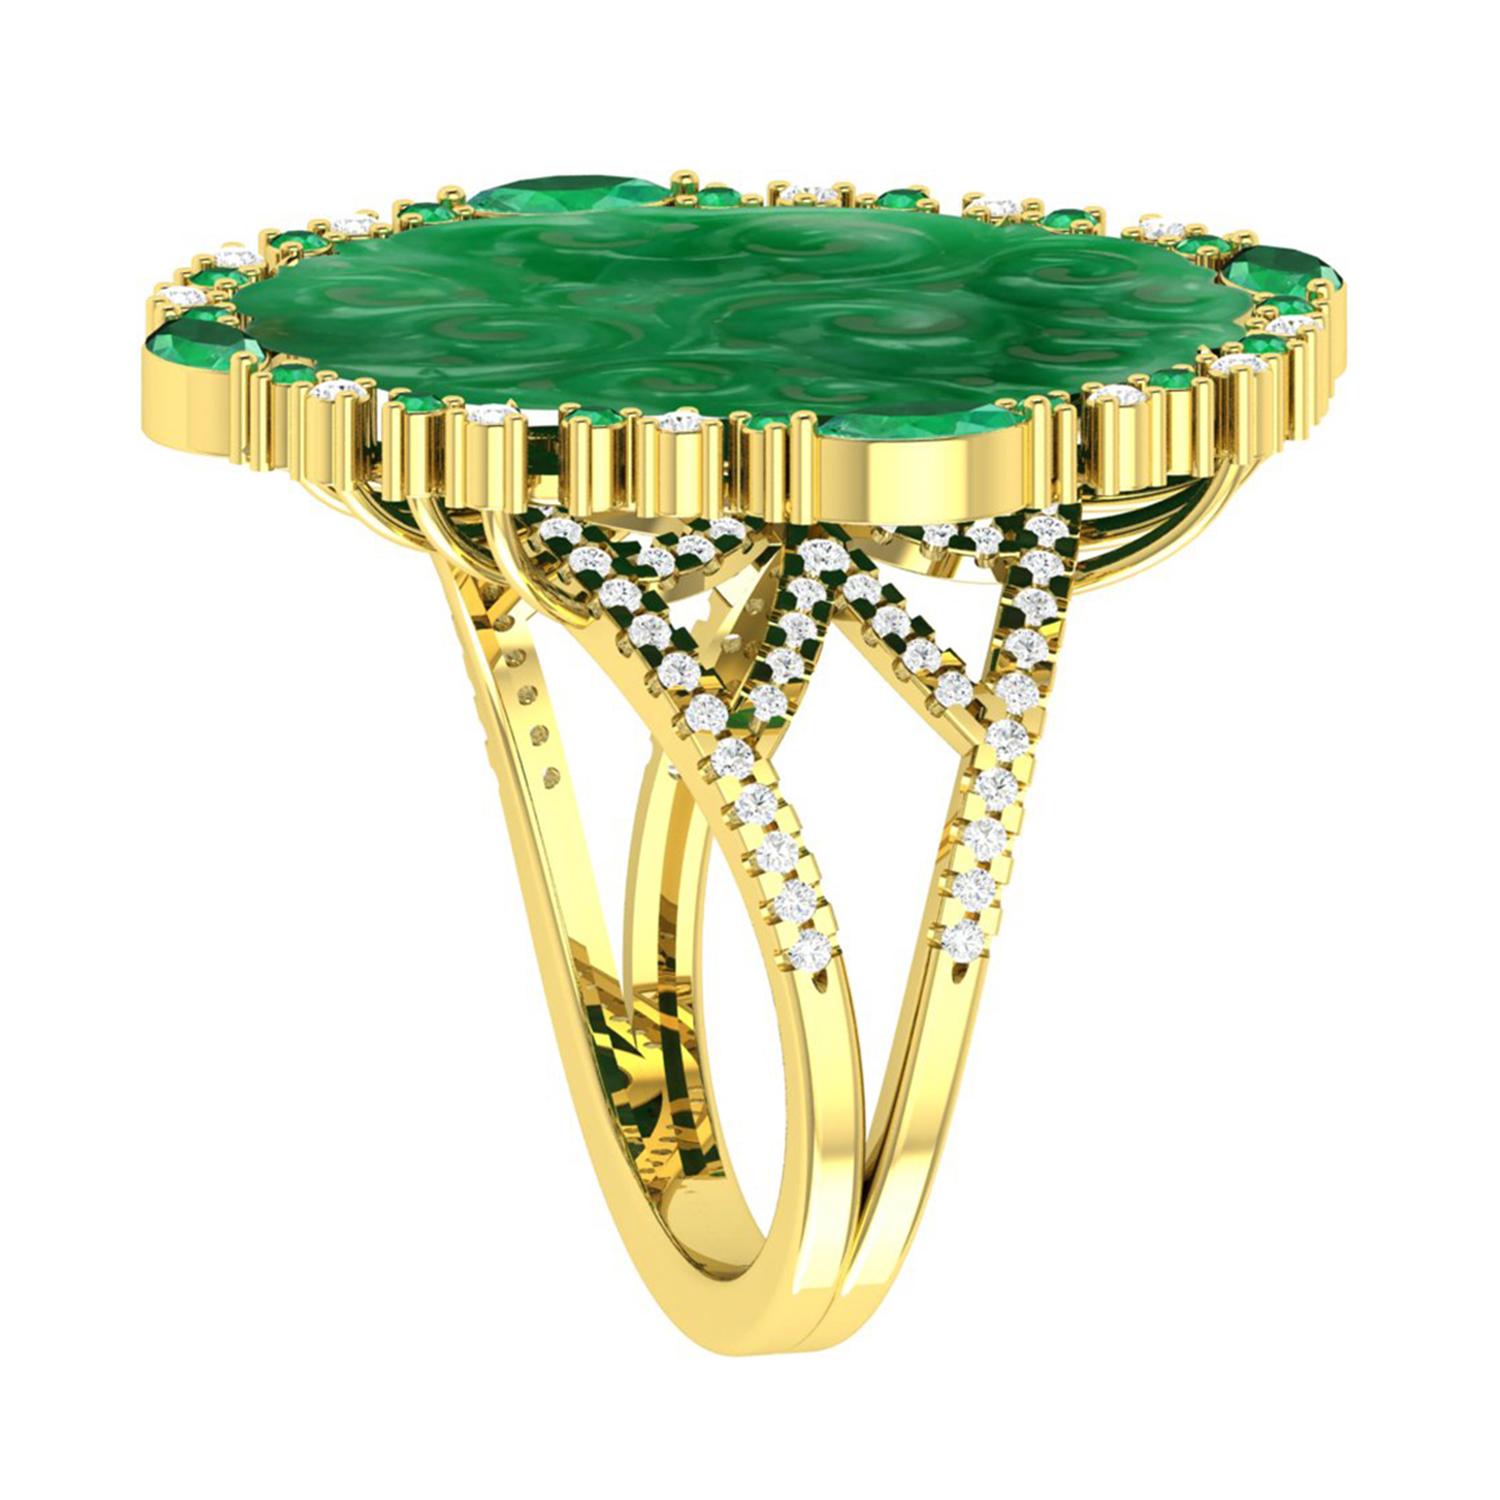 Modern Hand Carved Jade Ring with Diamonds in 18 Karat Yellow Gold